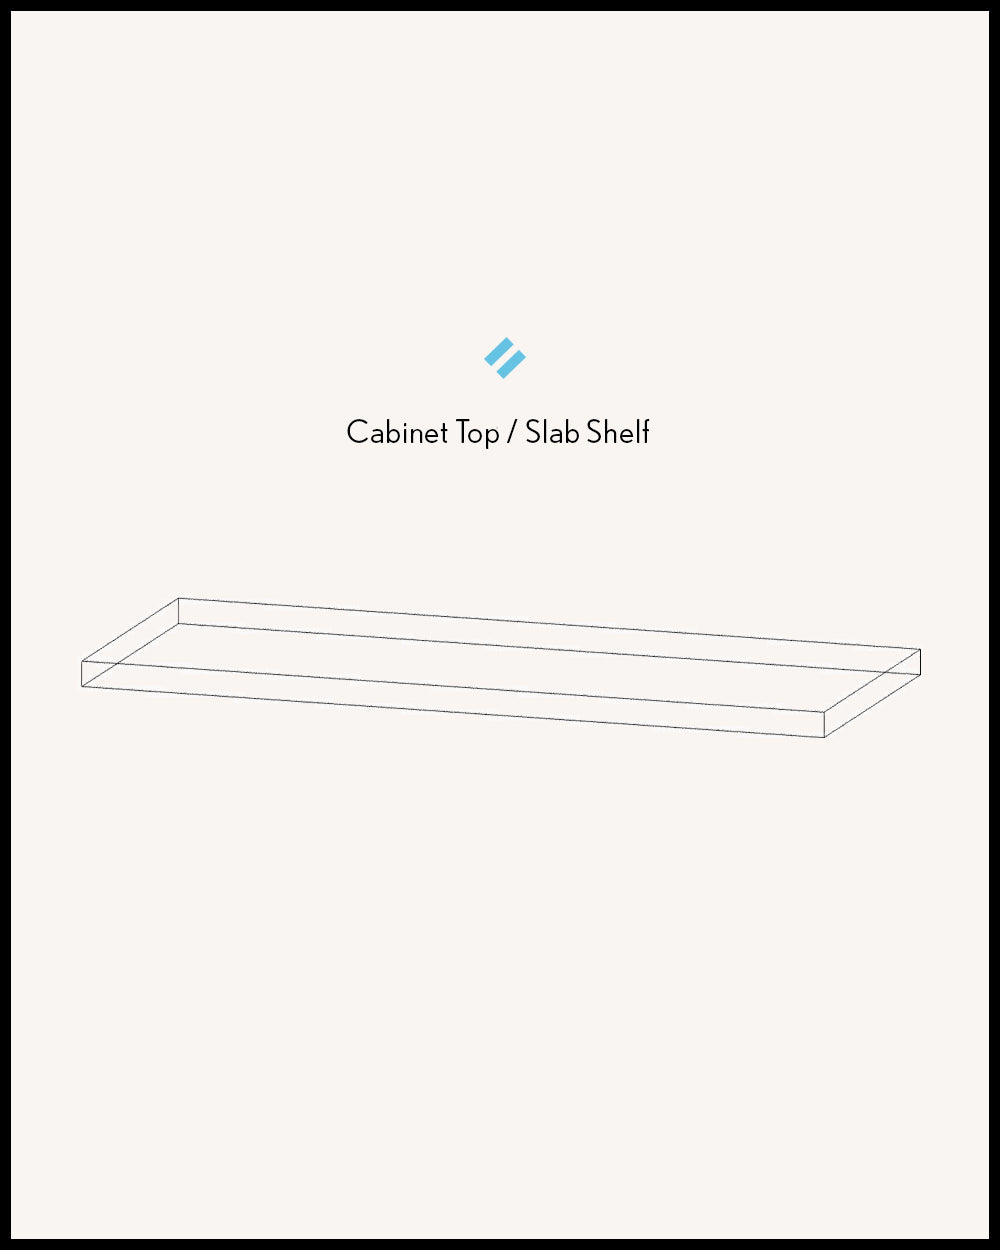 Bamboo 1.75" thick Cabinet Top / Slab Shelf